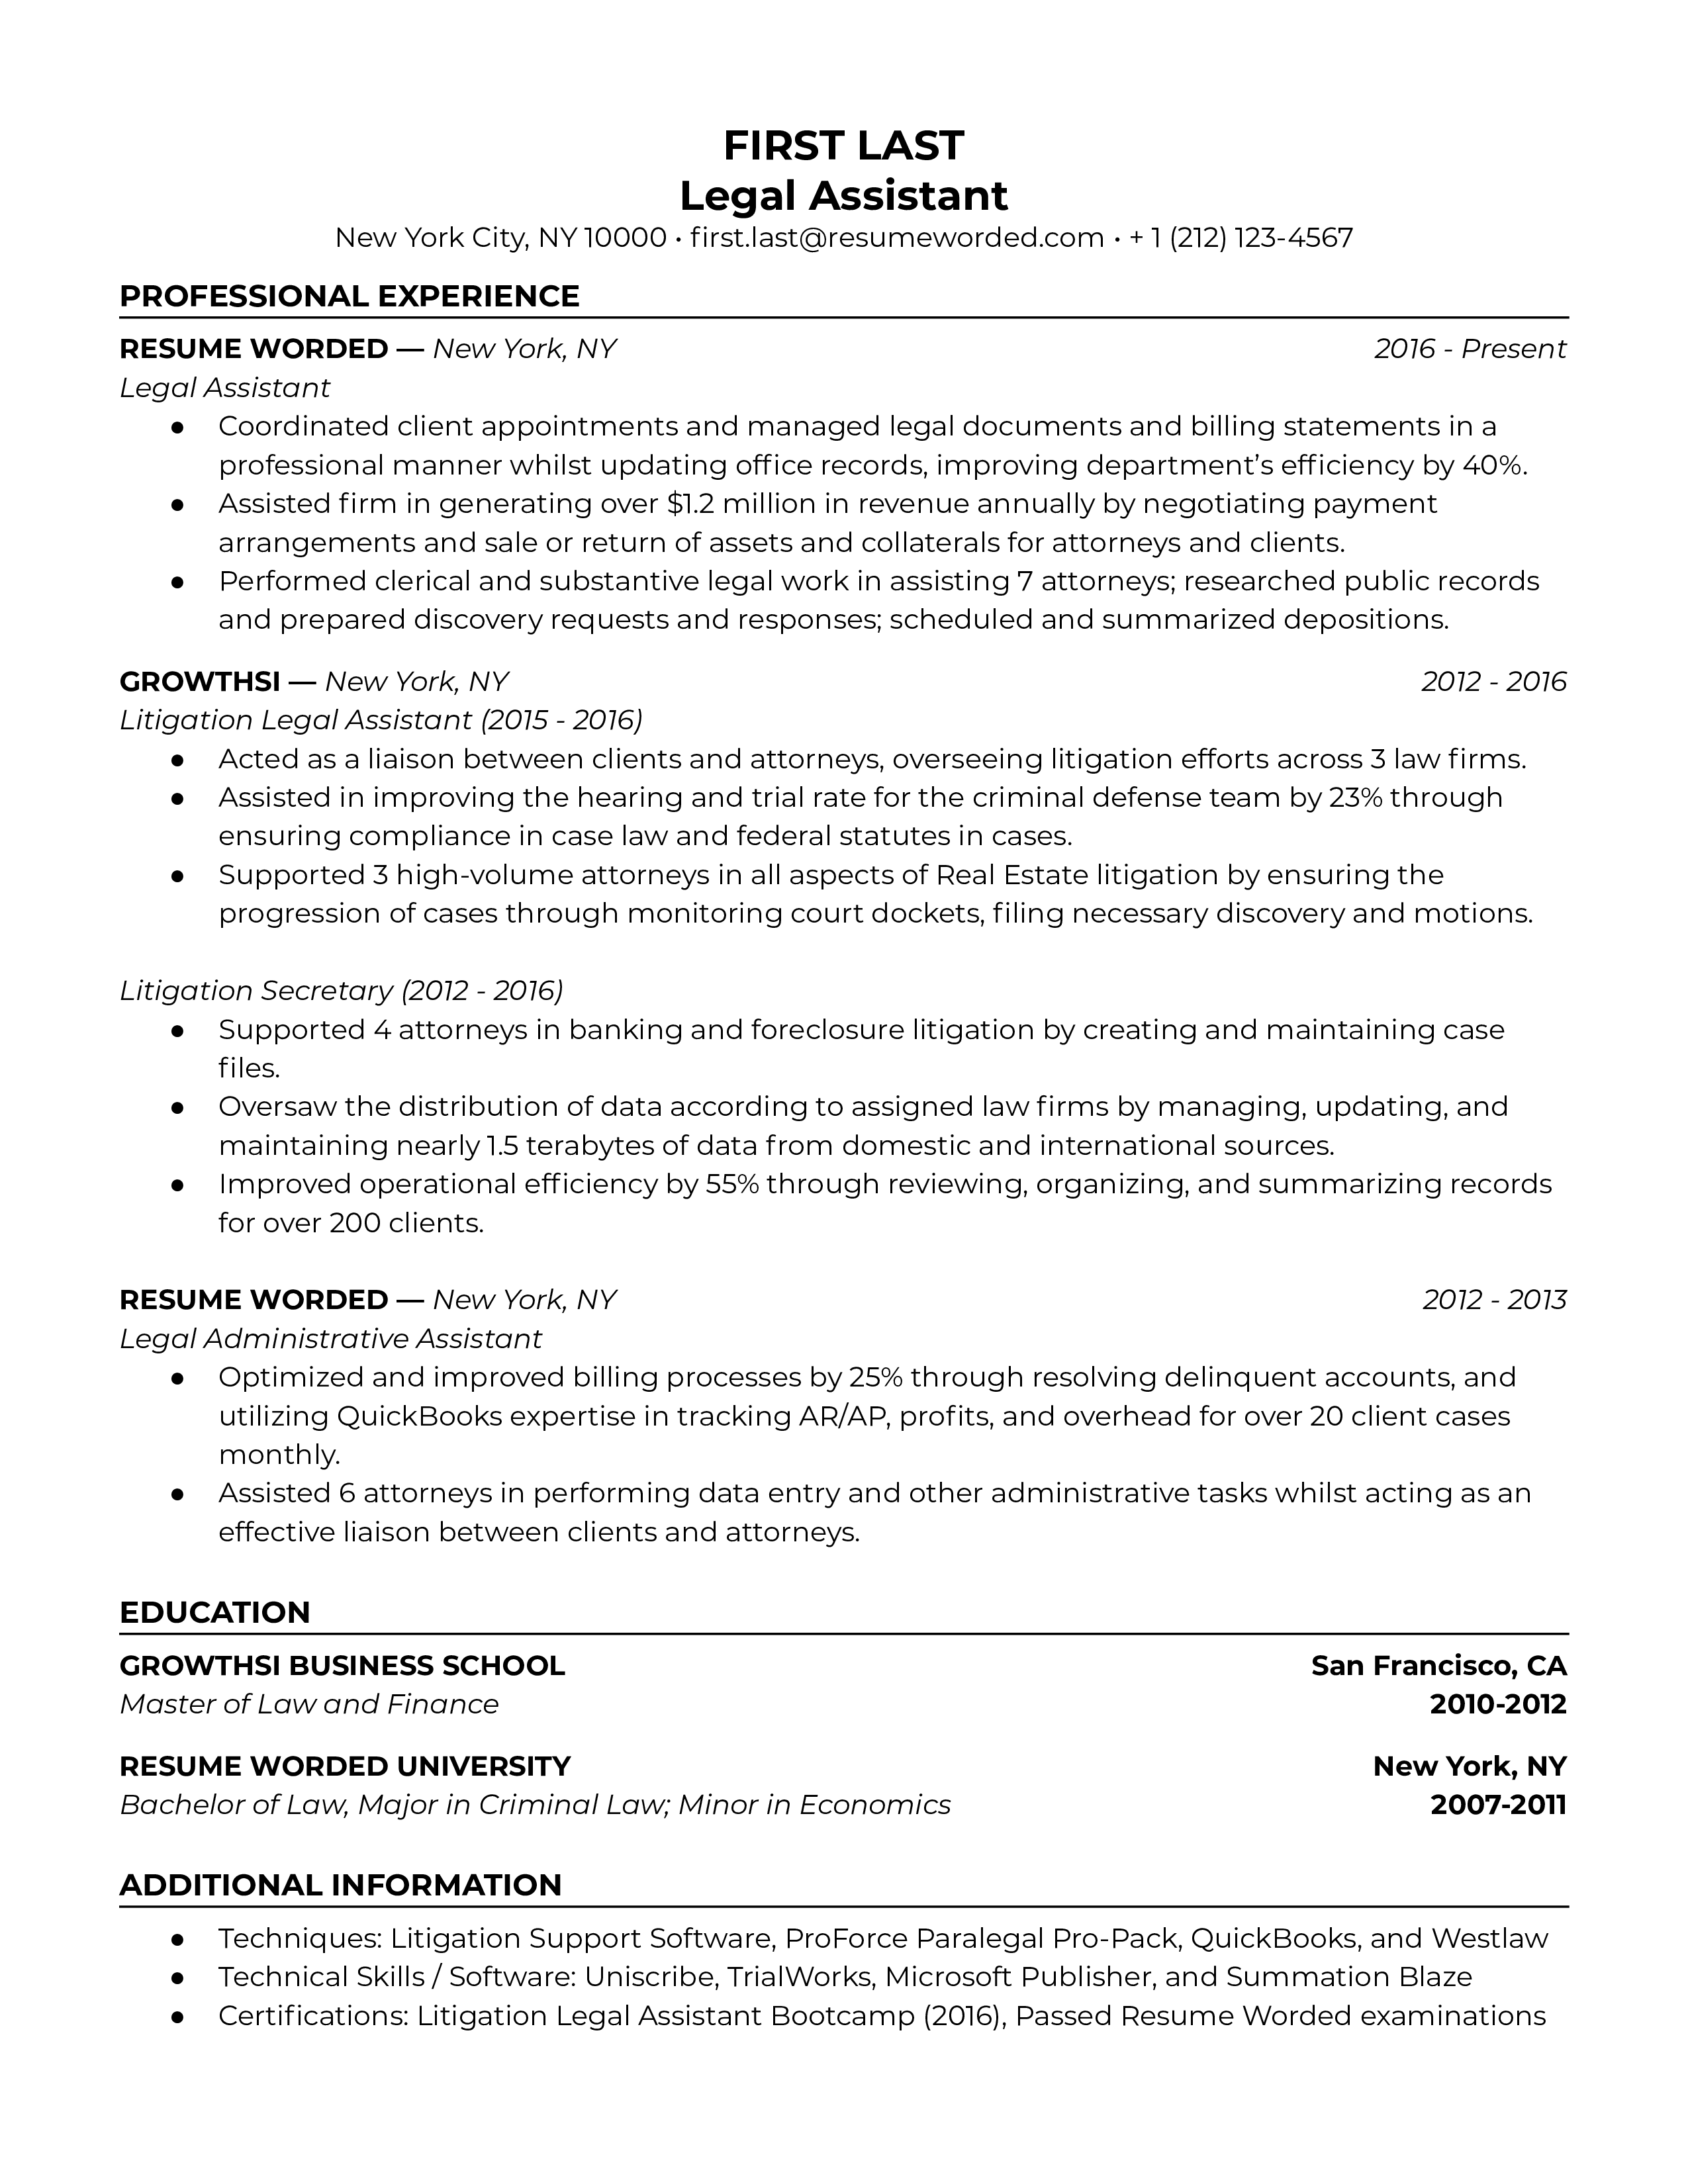 Legal assistant resume template example including hard numbers and metrics and an organized skills section